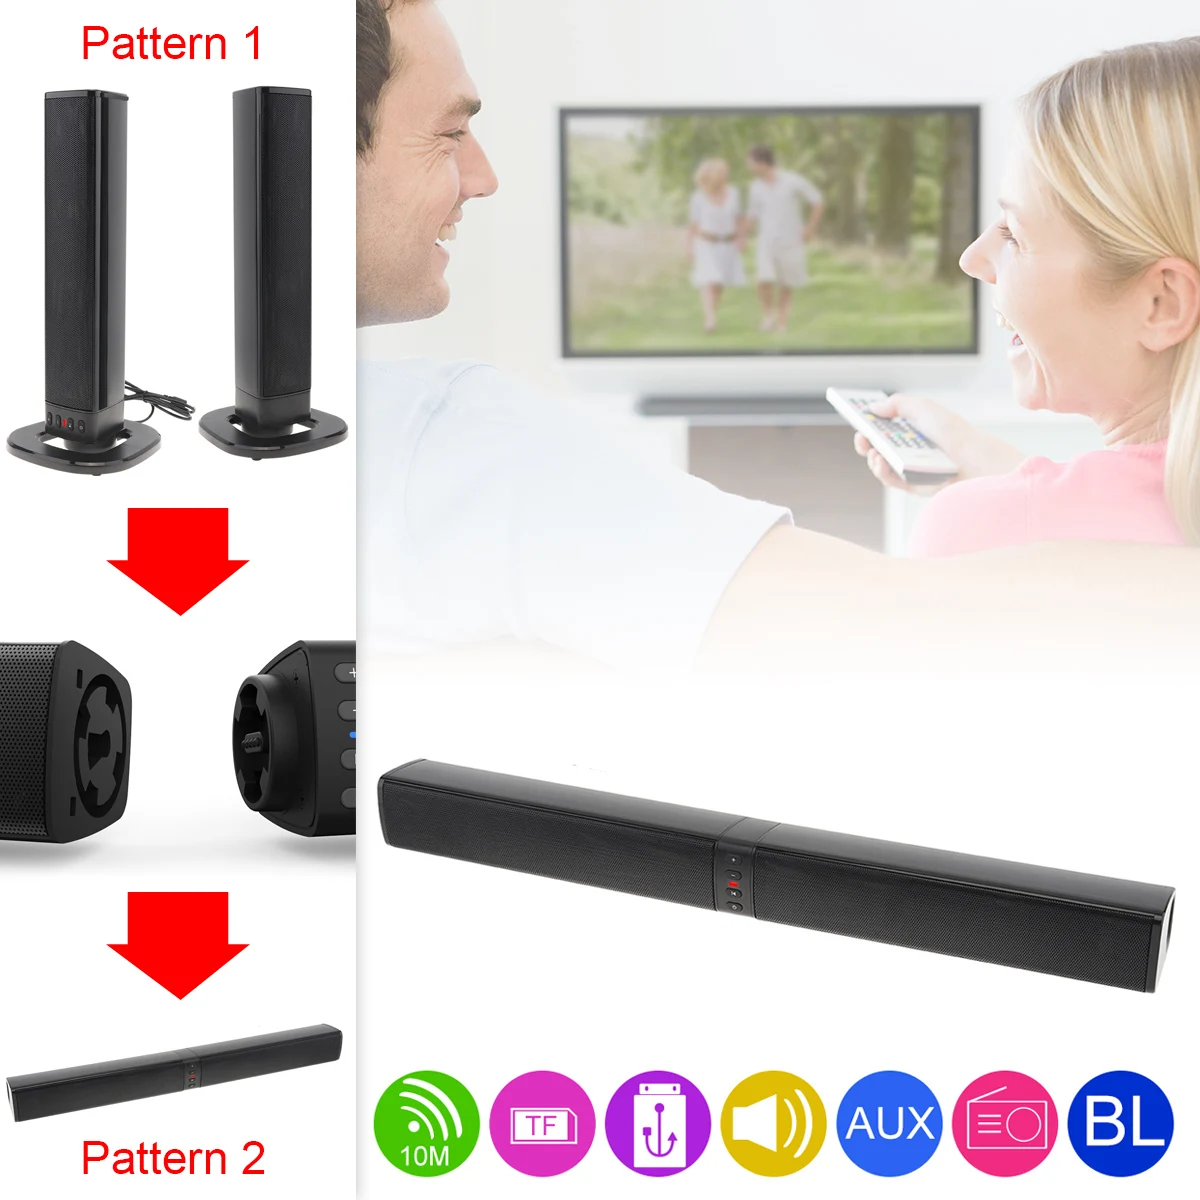 Enlarge BS-36 Home Theater Sensurround Multi-function Bluetooth Soundbar Speaker Support Foldable and Split for TV PC Smartphone